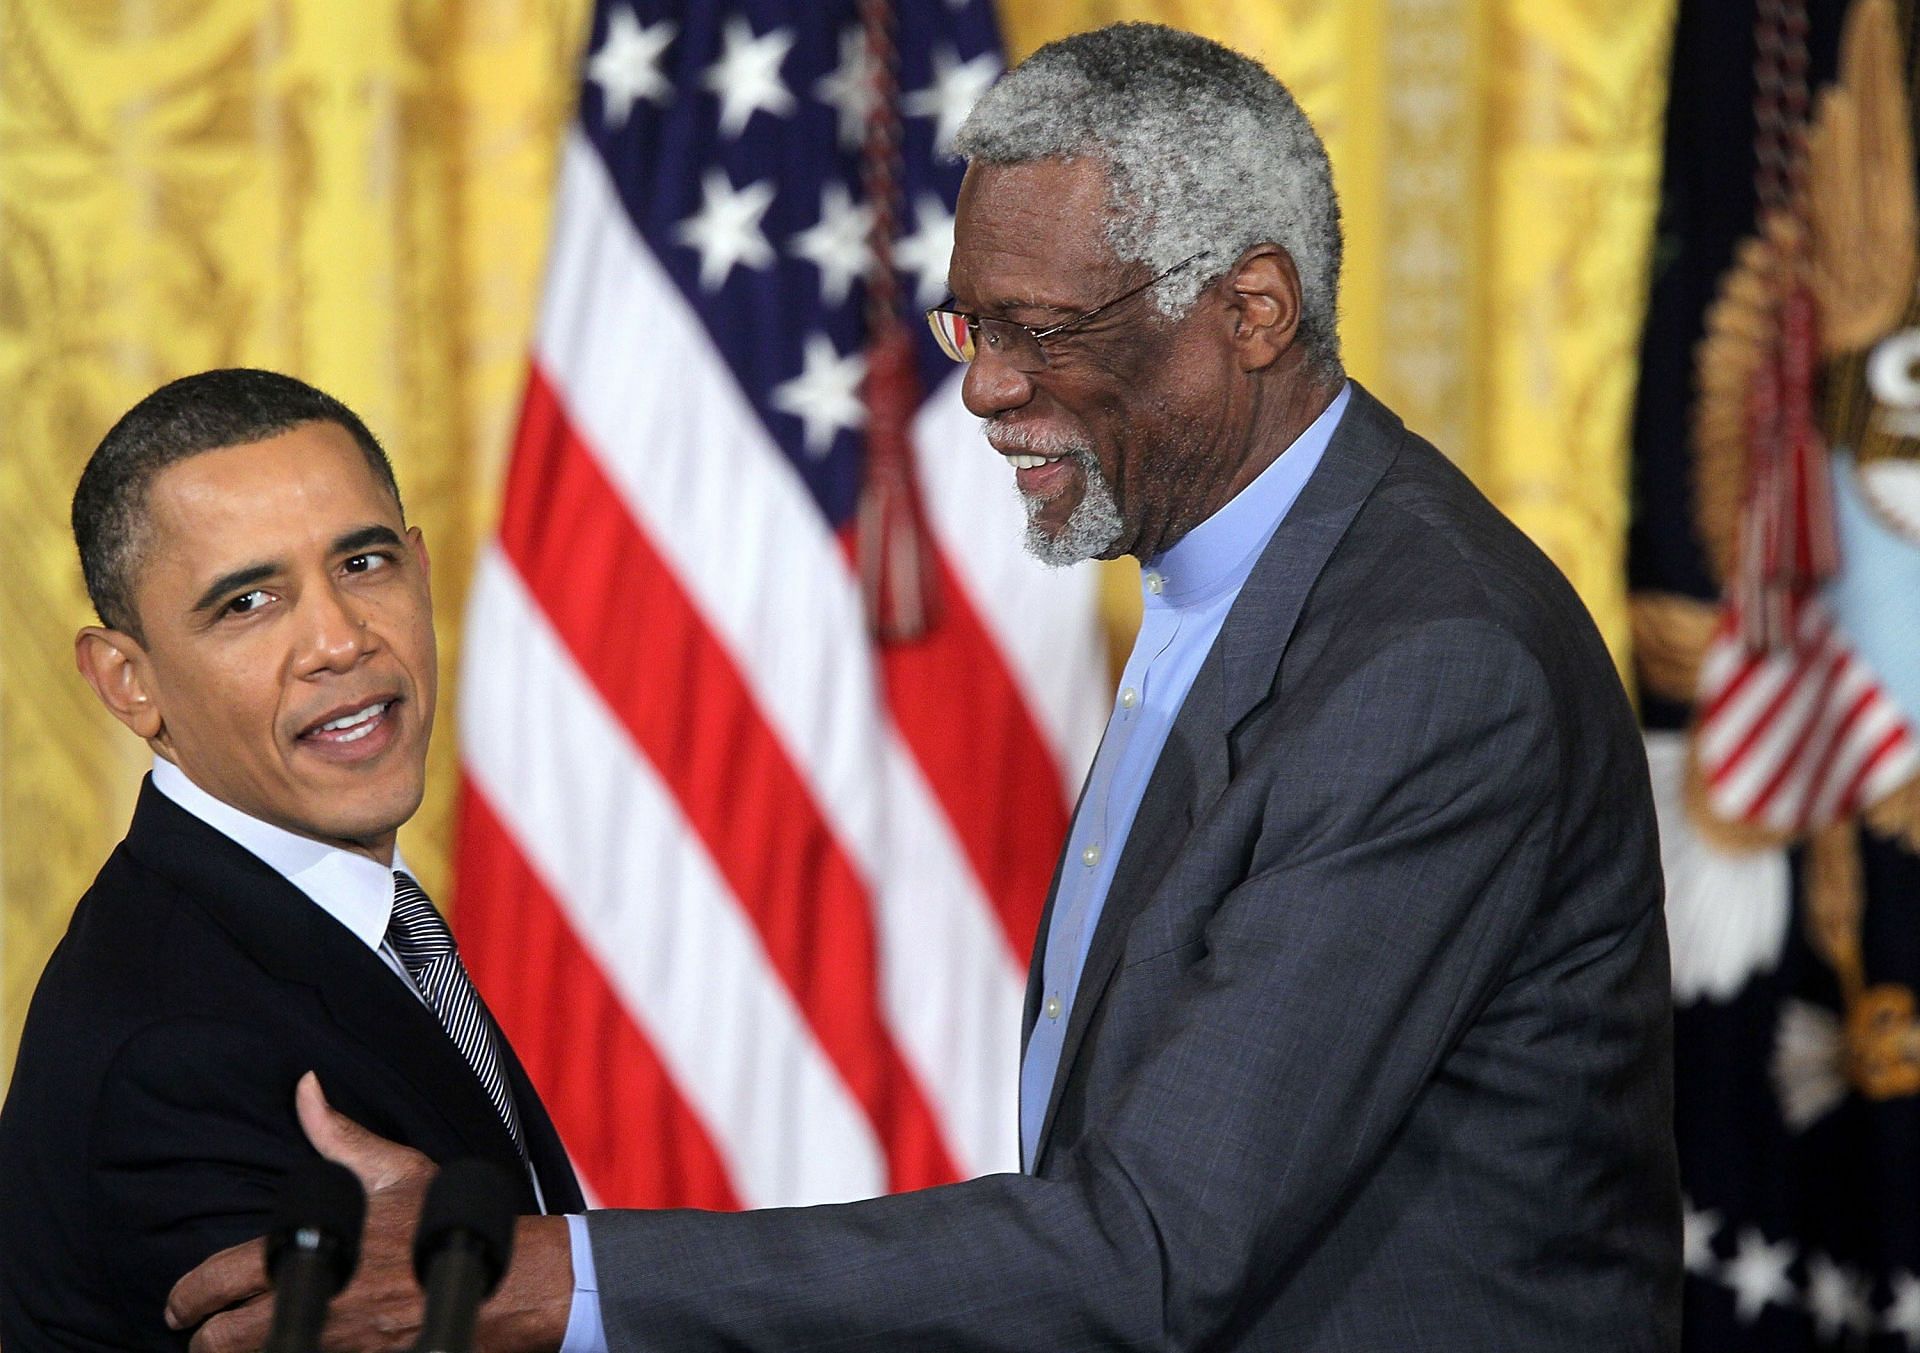 Bill Russell was honored by Barack Obama with the prestigious Presidential Medal of Freedom. [Photo: Bleacher Report]